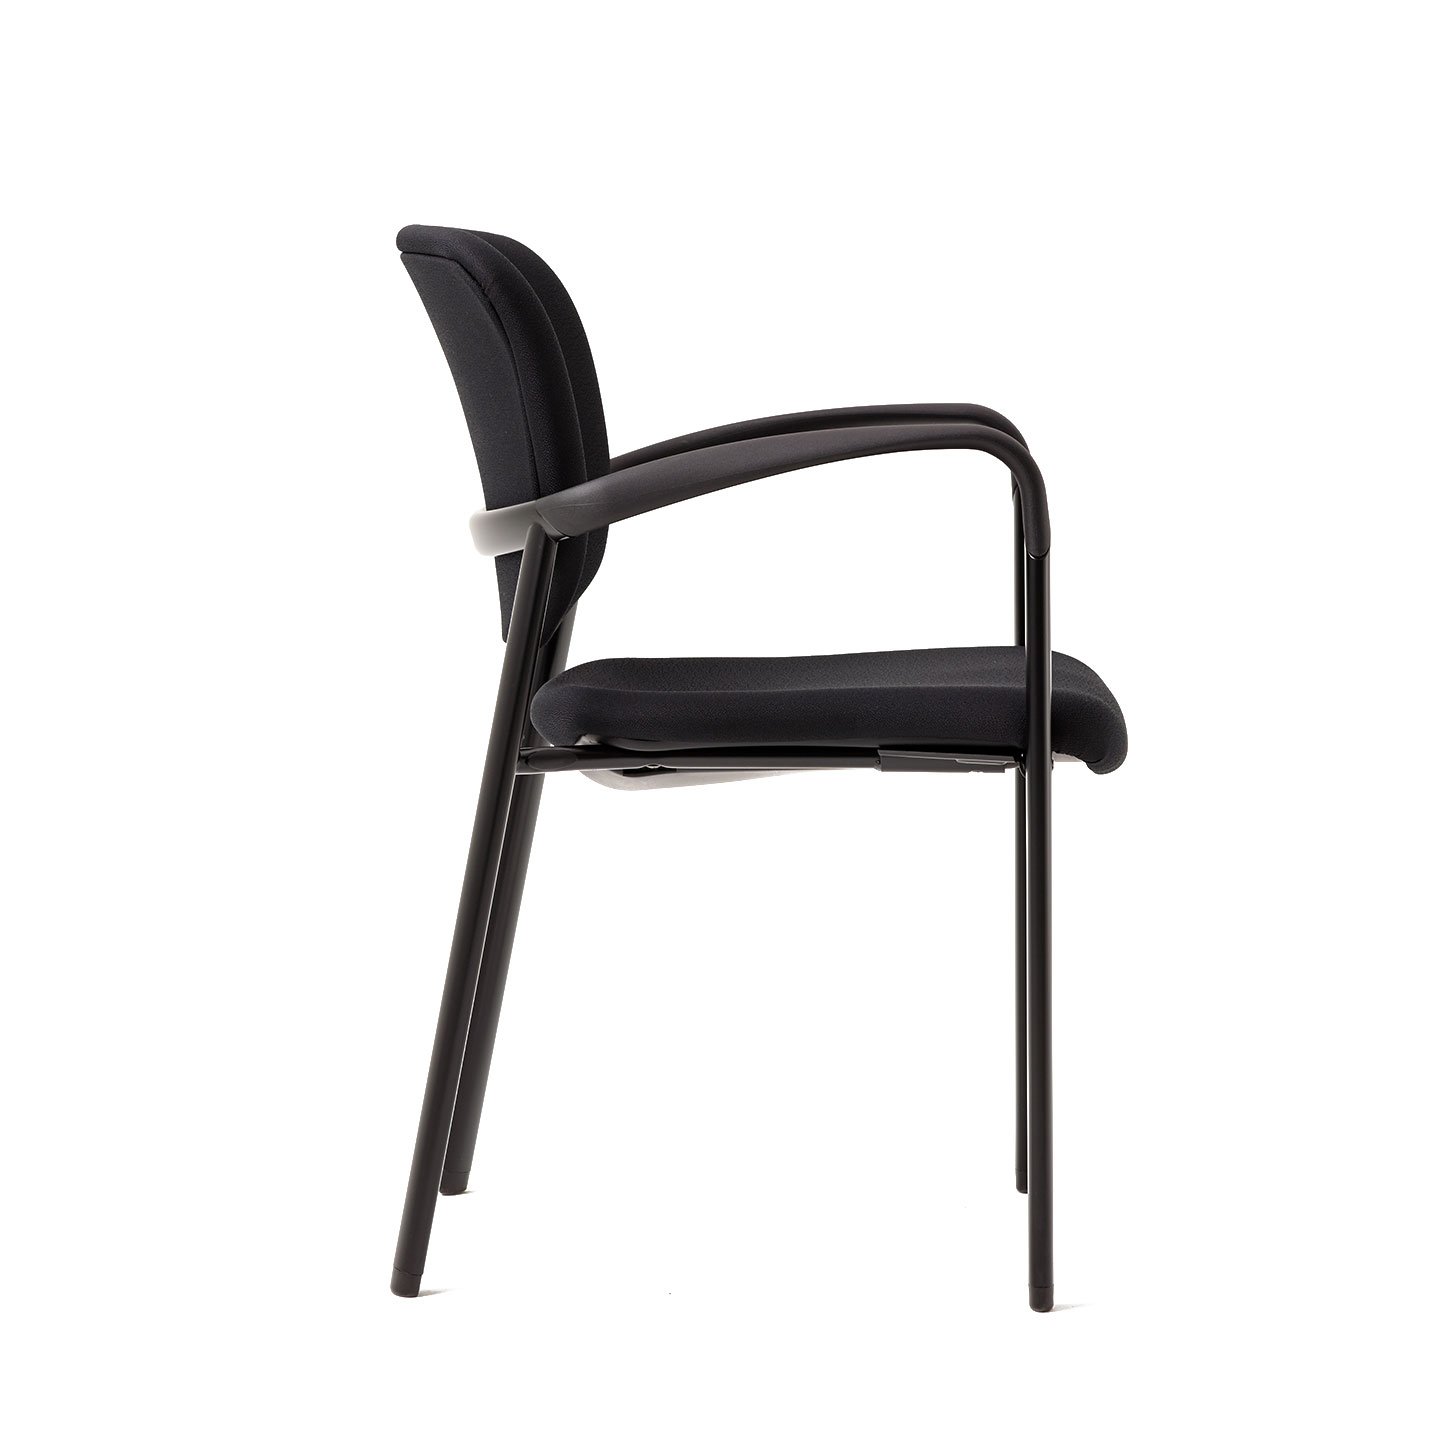 Haworth Improv Side chair in black upholstery in side view